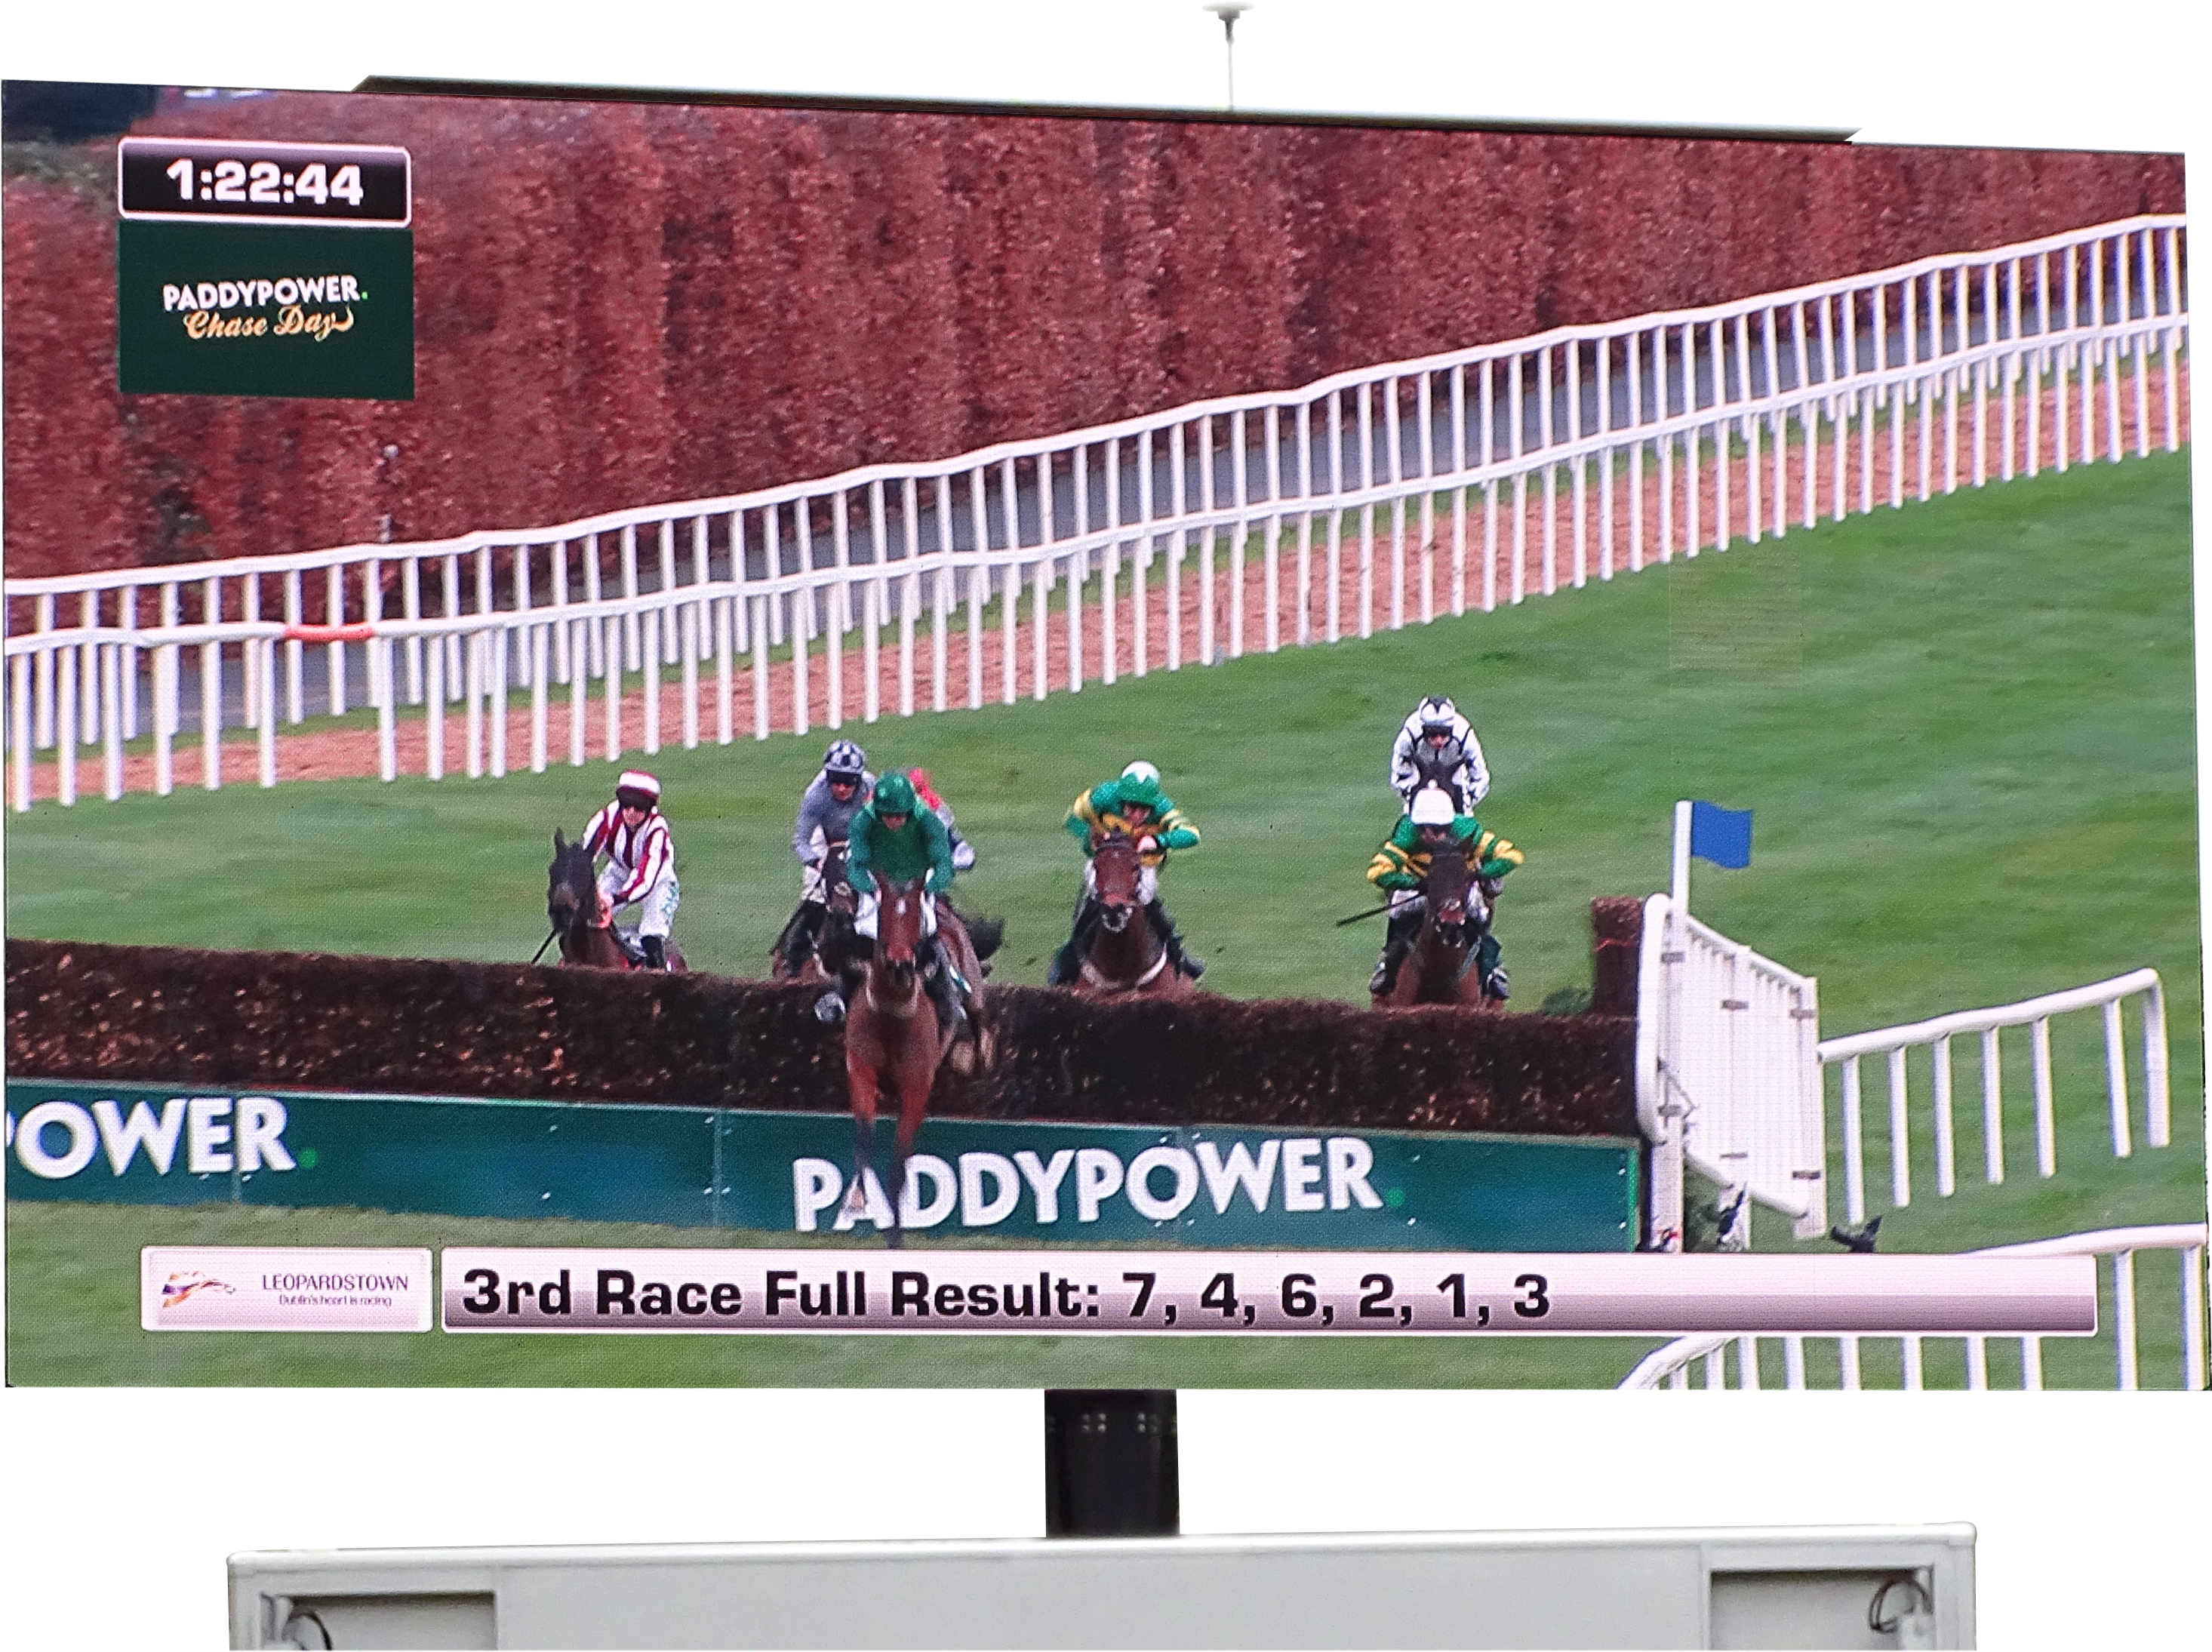 M60 – 60m² is Europe’s Largest Container Screen at Punchestown racecourse